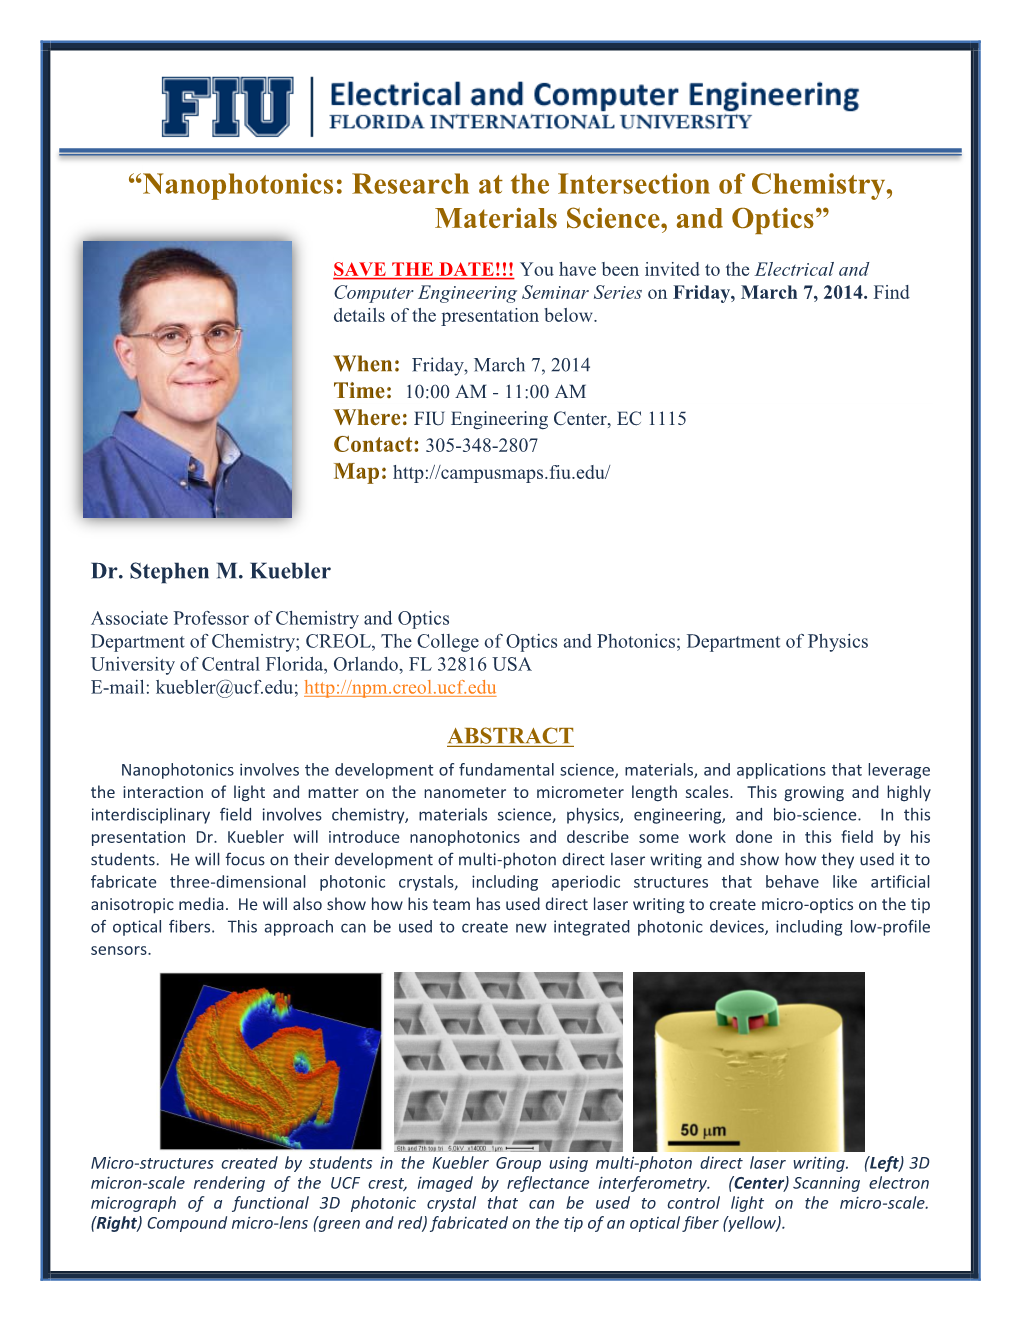 “Nanophotonics: Research at the Intersection of Chemistry, Materials Science, and Optics”